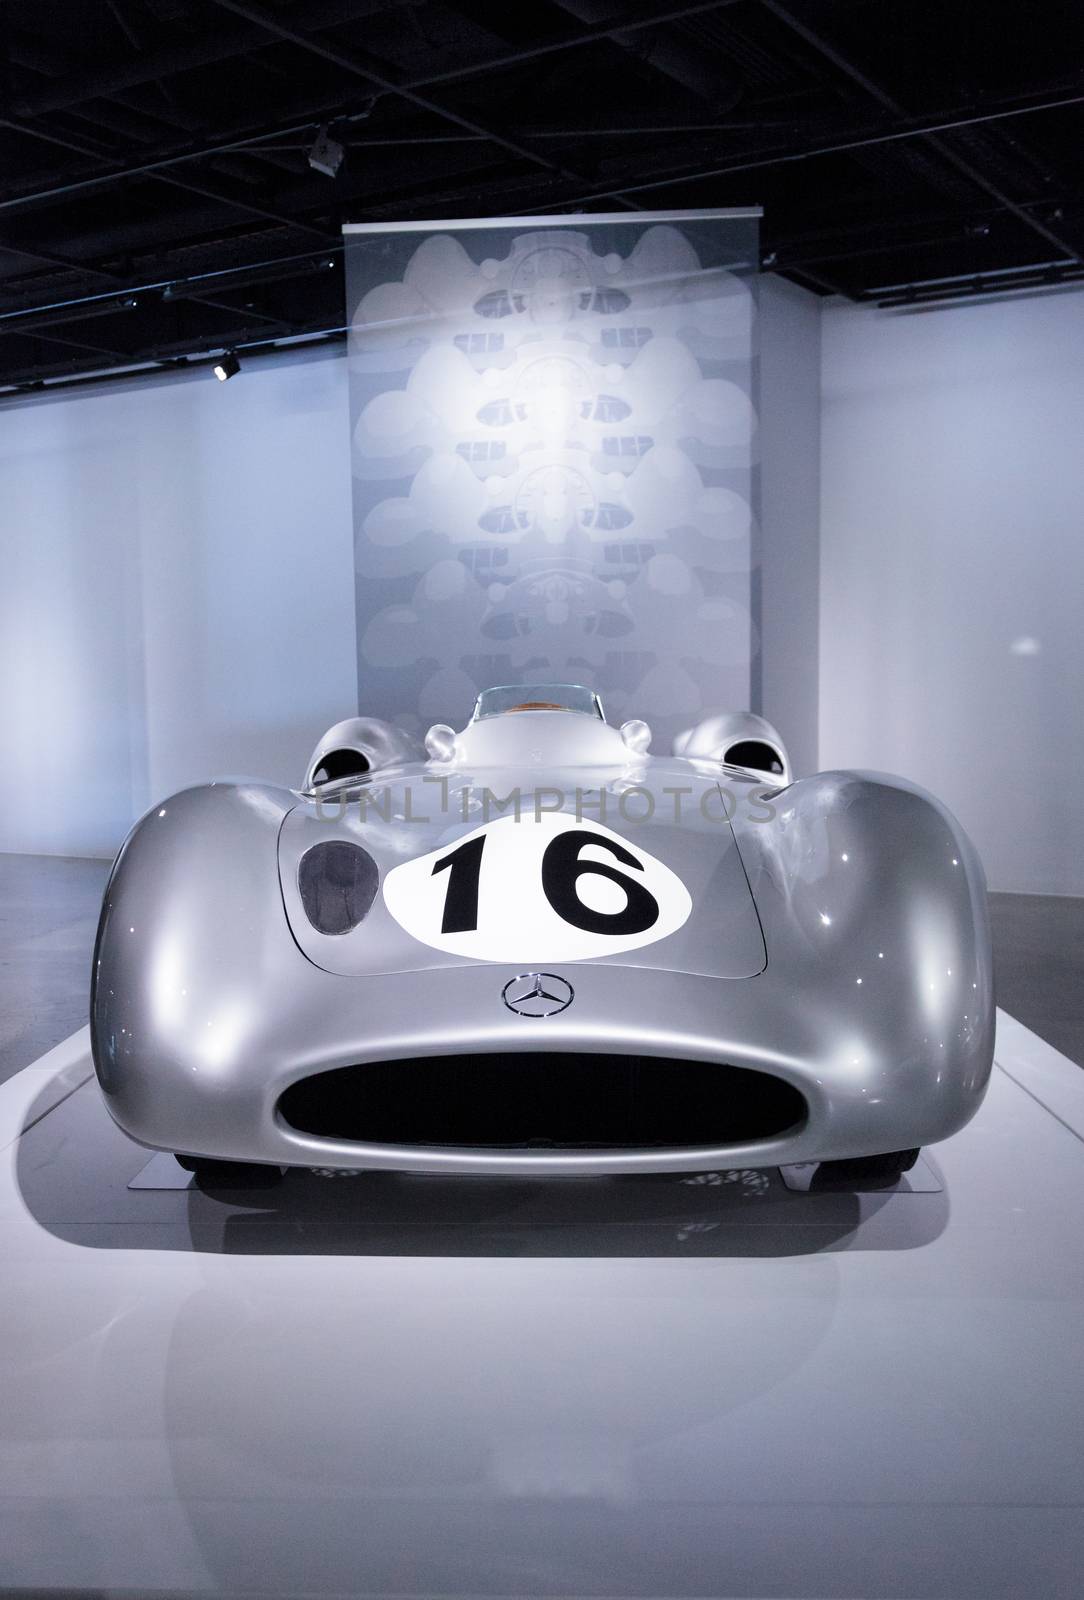 Los Angeles, CA, USA — April 16, 2016: A 1954 Mercedes Benz W196 from the collection of the Indianapolis Motor Speedway Hall of Fame Museum at the Petersen Automotive Museum in Los Angeles, California, United States. Editorial use.